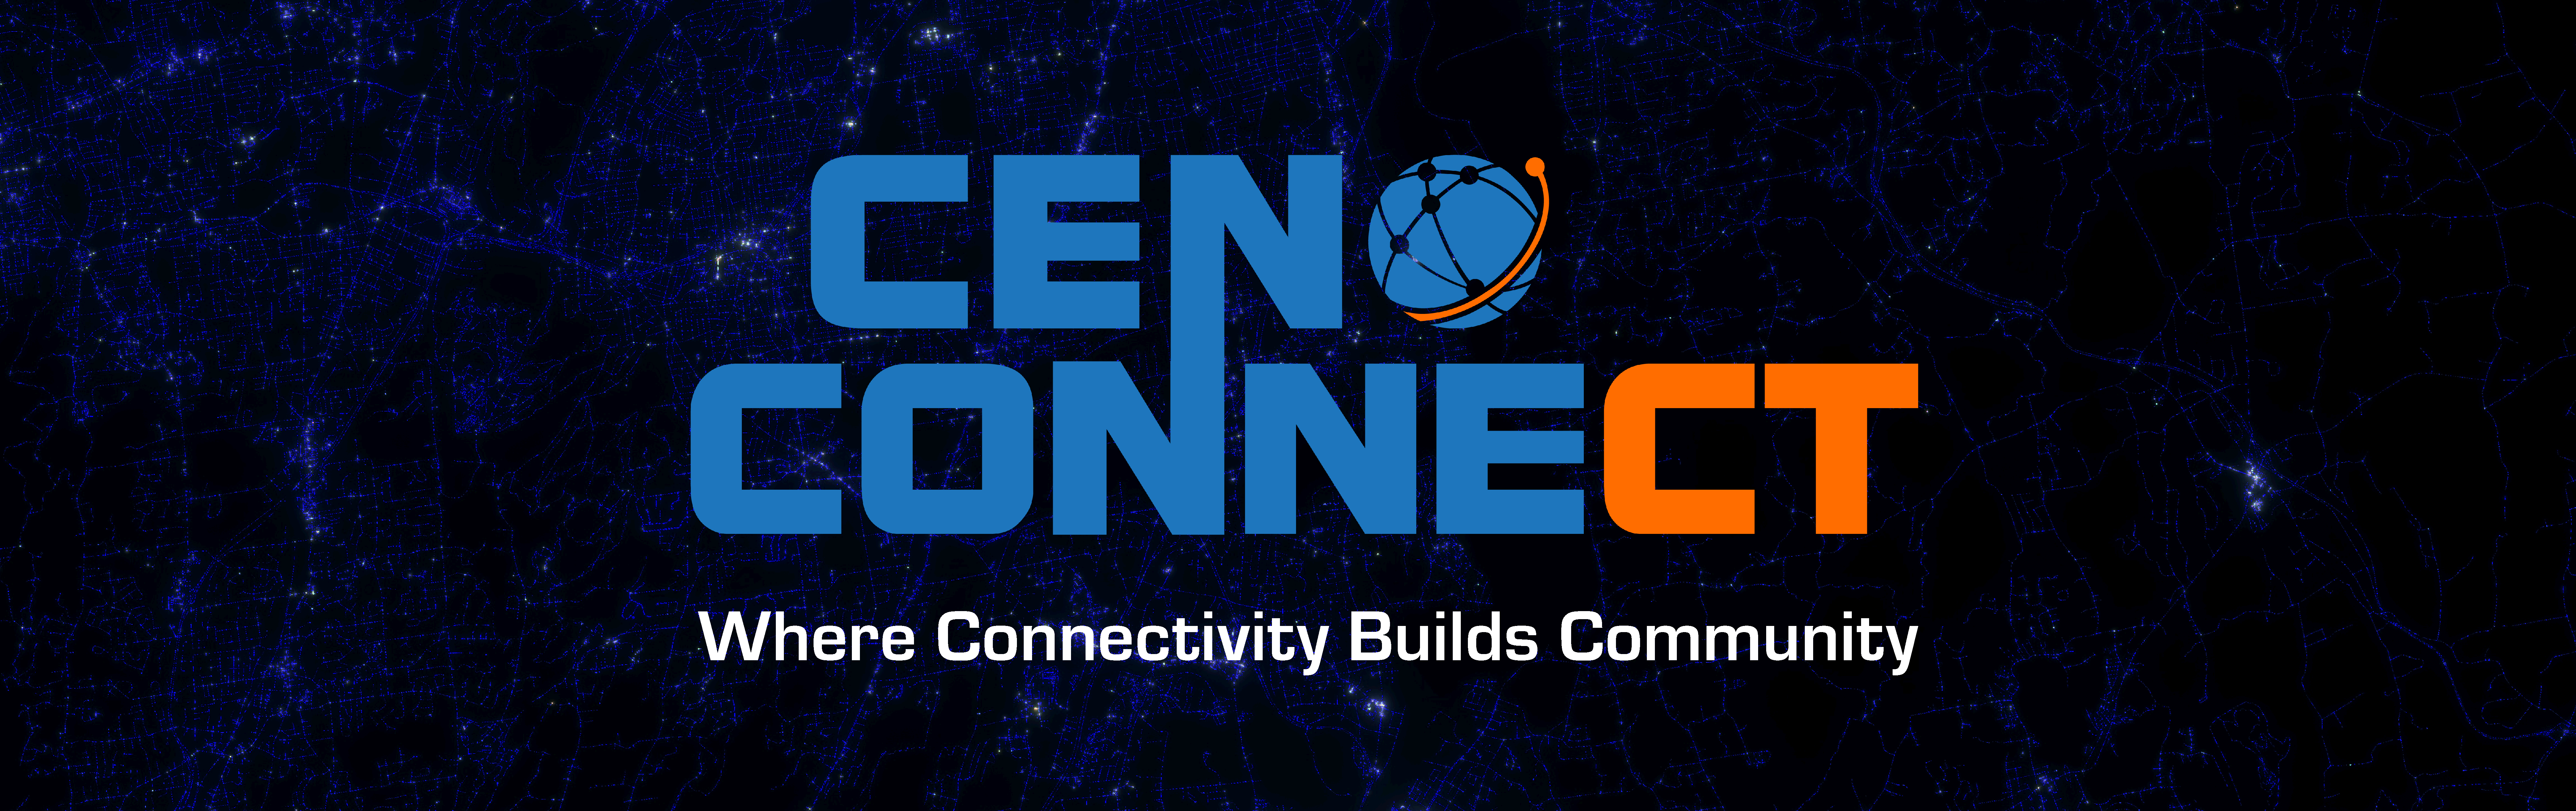 CEN Connect: Where Connectivity Builds Community, Background included houses with internet connecting 